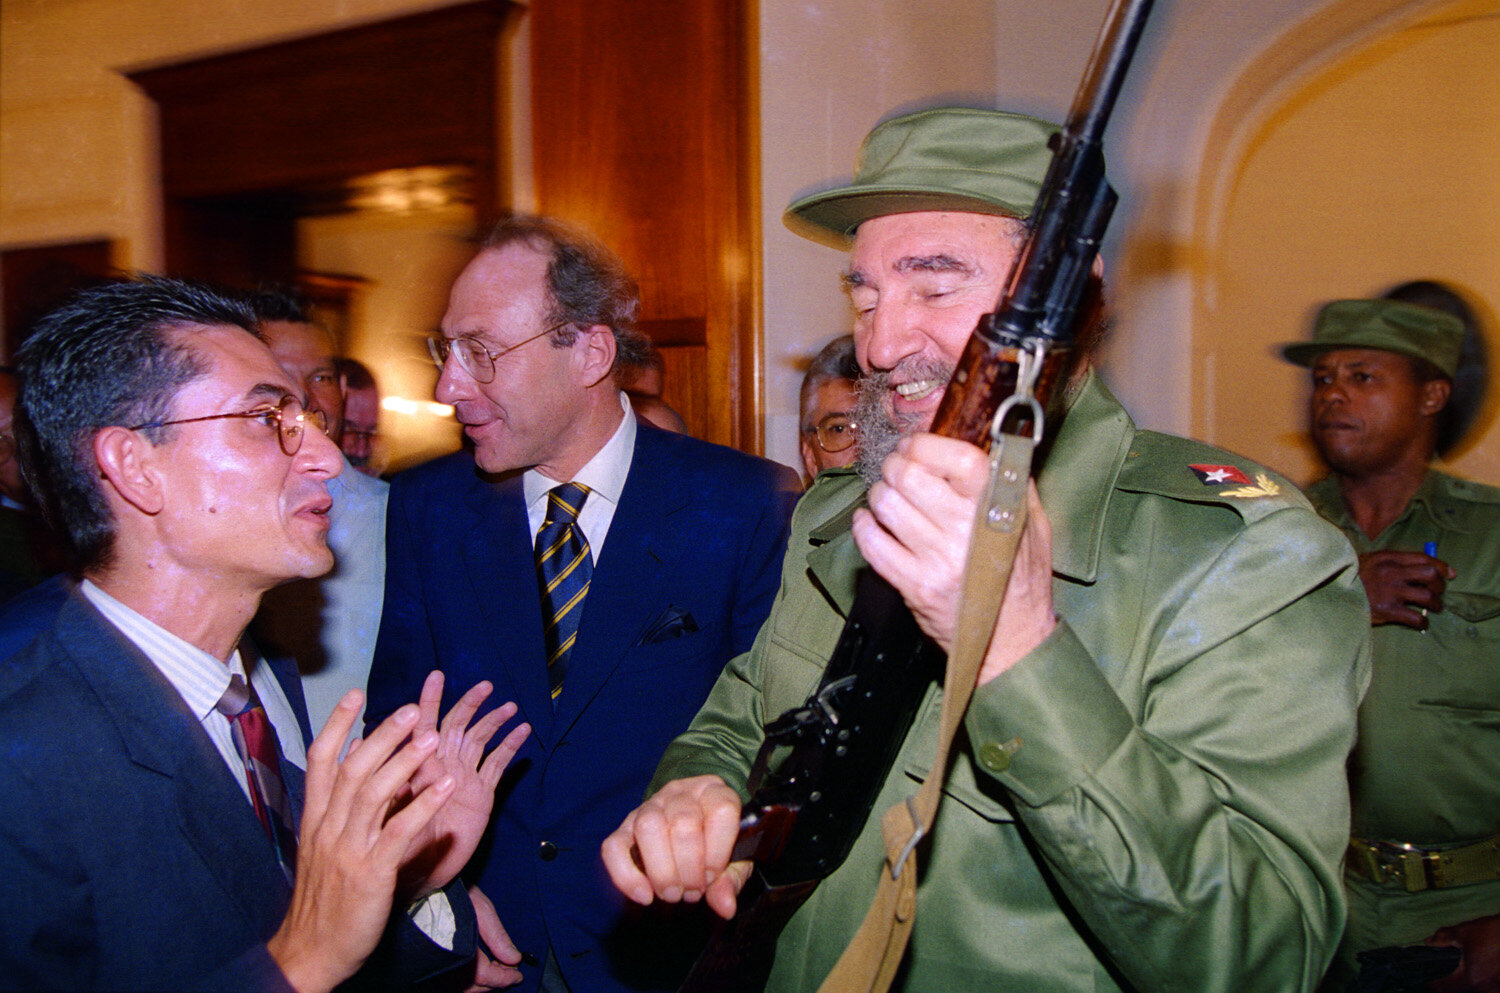  Fidel Castro holds his rifle as he talks about hunting with the Italian ambassador (C) and his translator (L), in the Italian residence, after Cuba signed a joint venture with Italian mineral water producer San Pellegrino, on April 7, 1995, in Havan